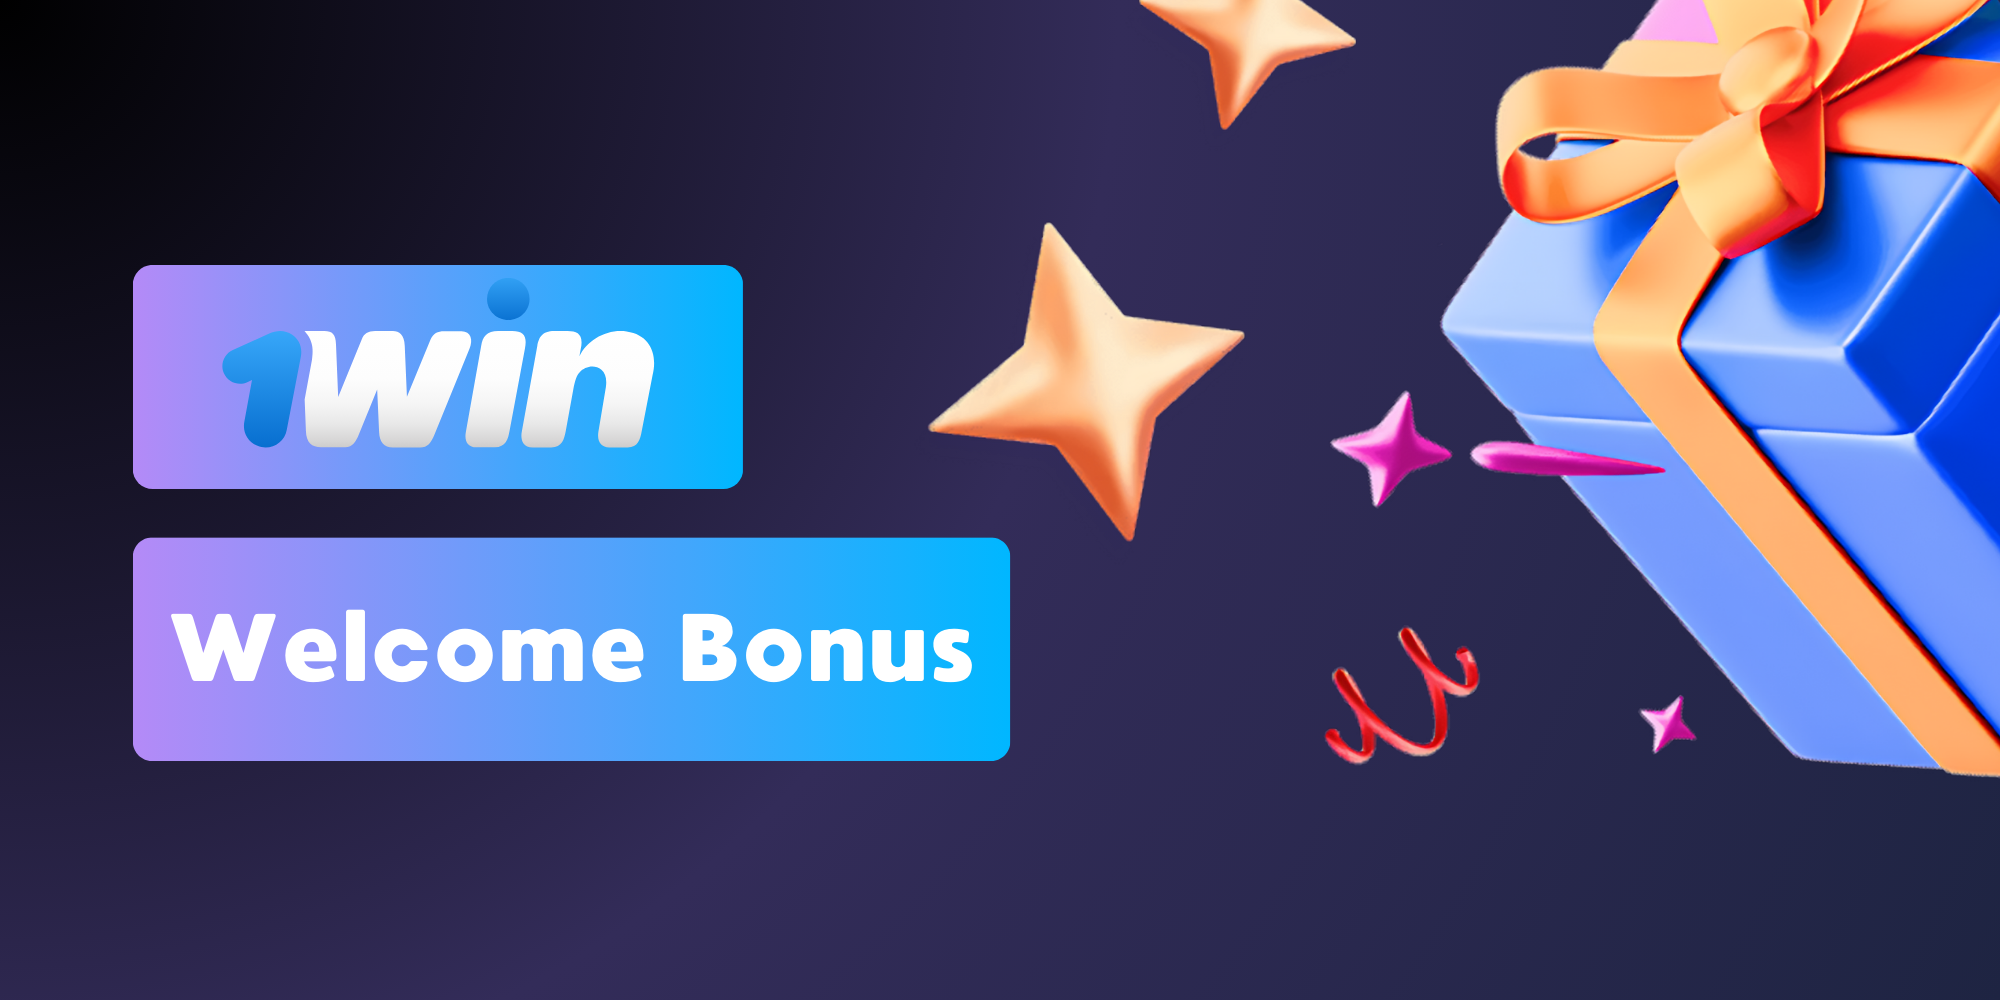 All new registered users receive a special welcome bonus from 1win